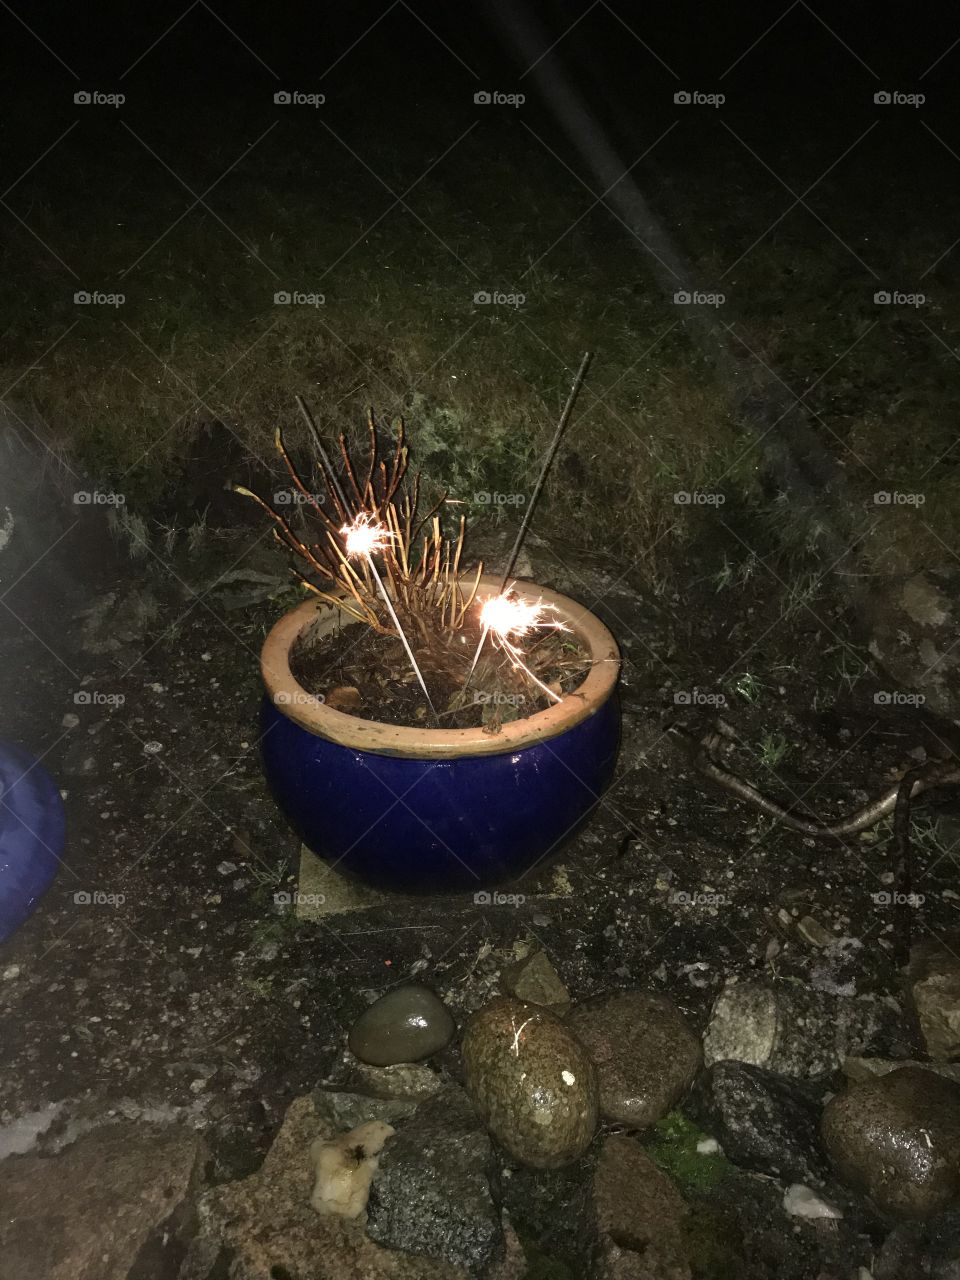 New Year’s Eve celebrations with burnig sticks. Stones, mud and grass surrounds the flower pot, where the burning sticks are located for celebrating a new year.